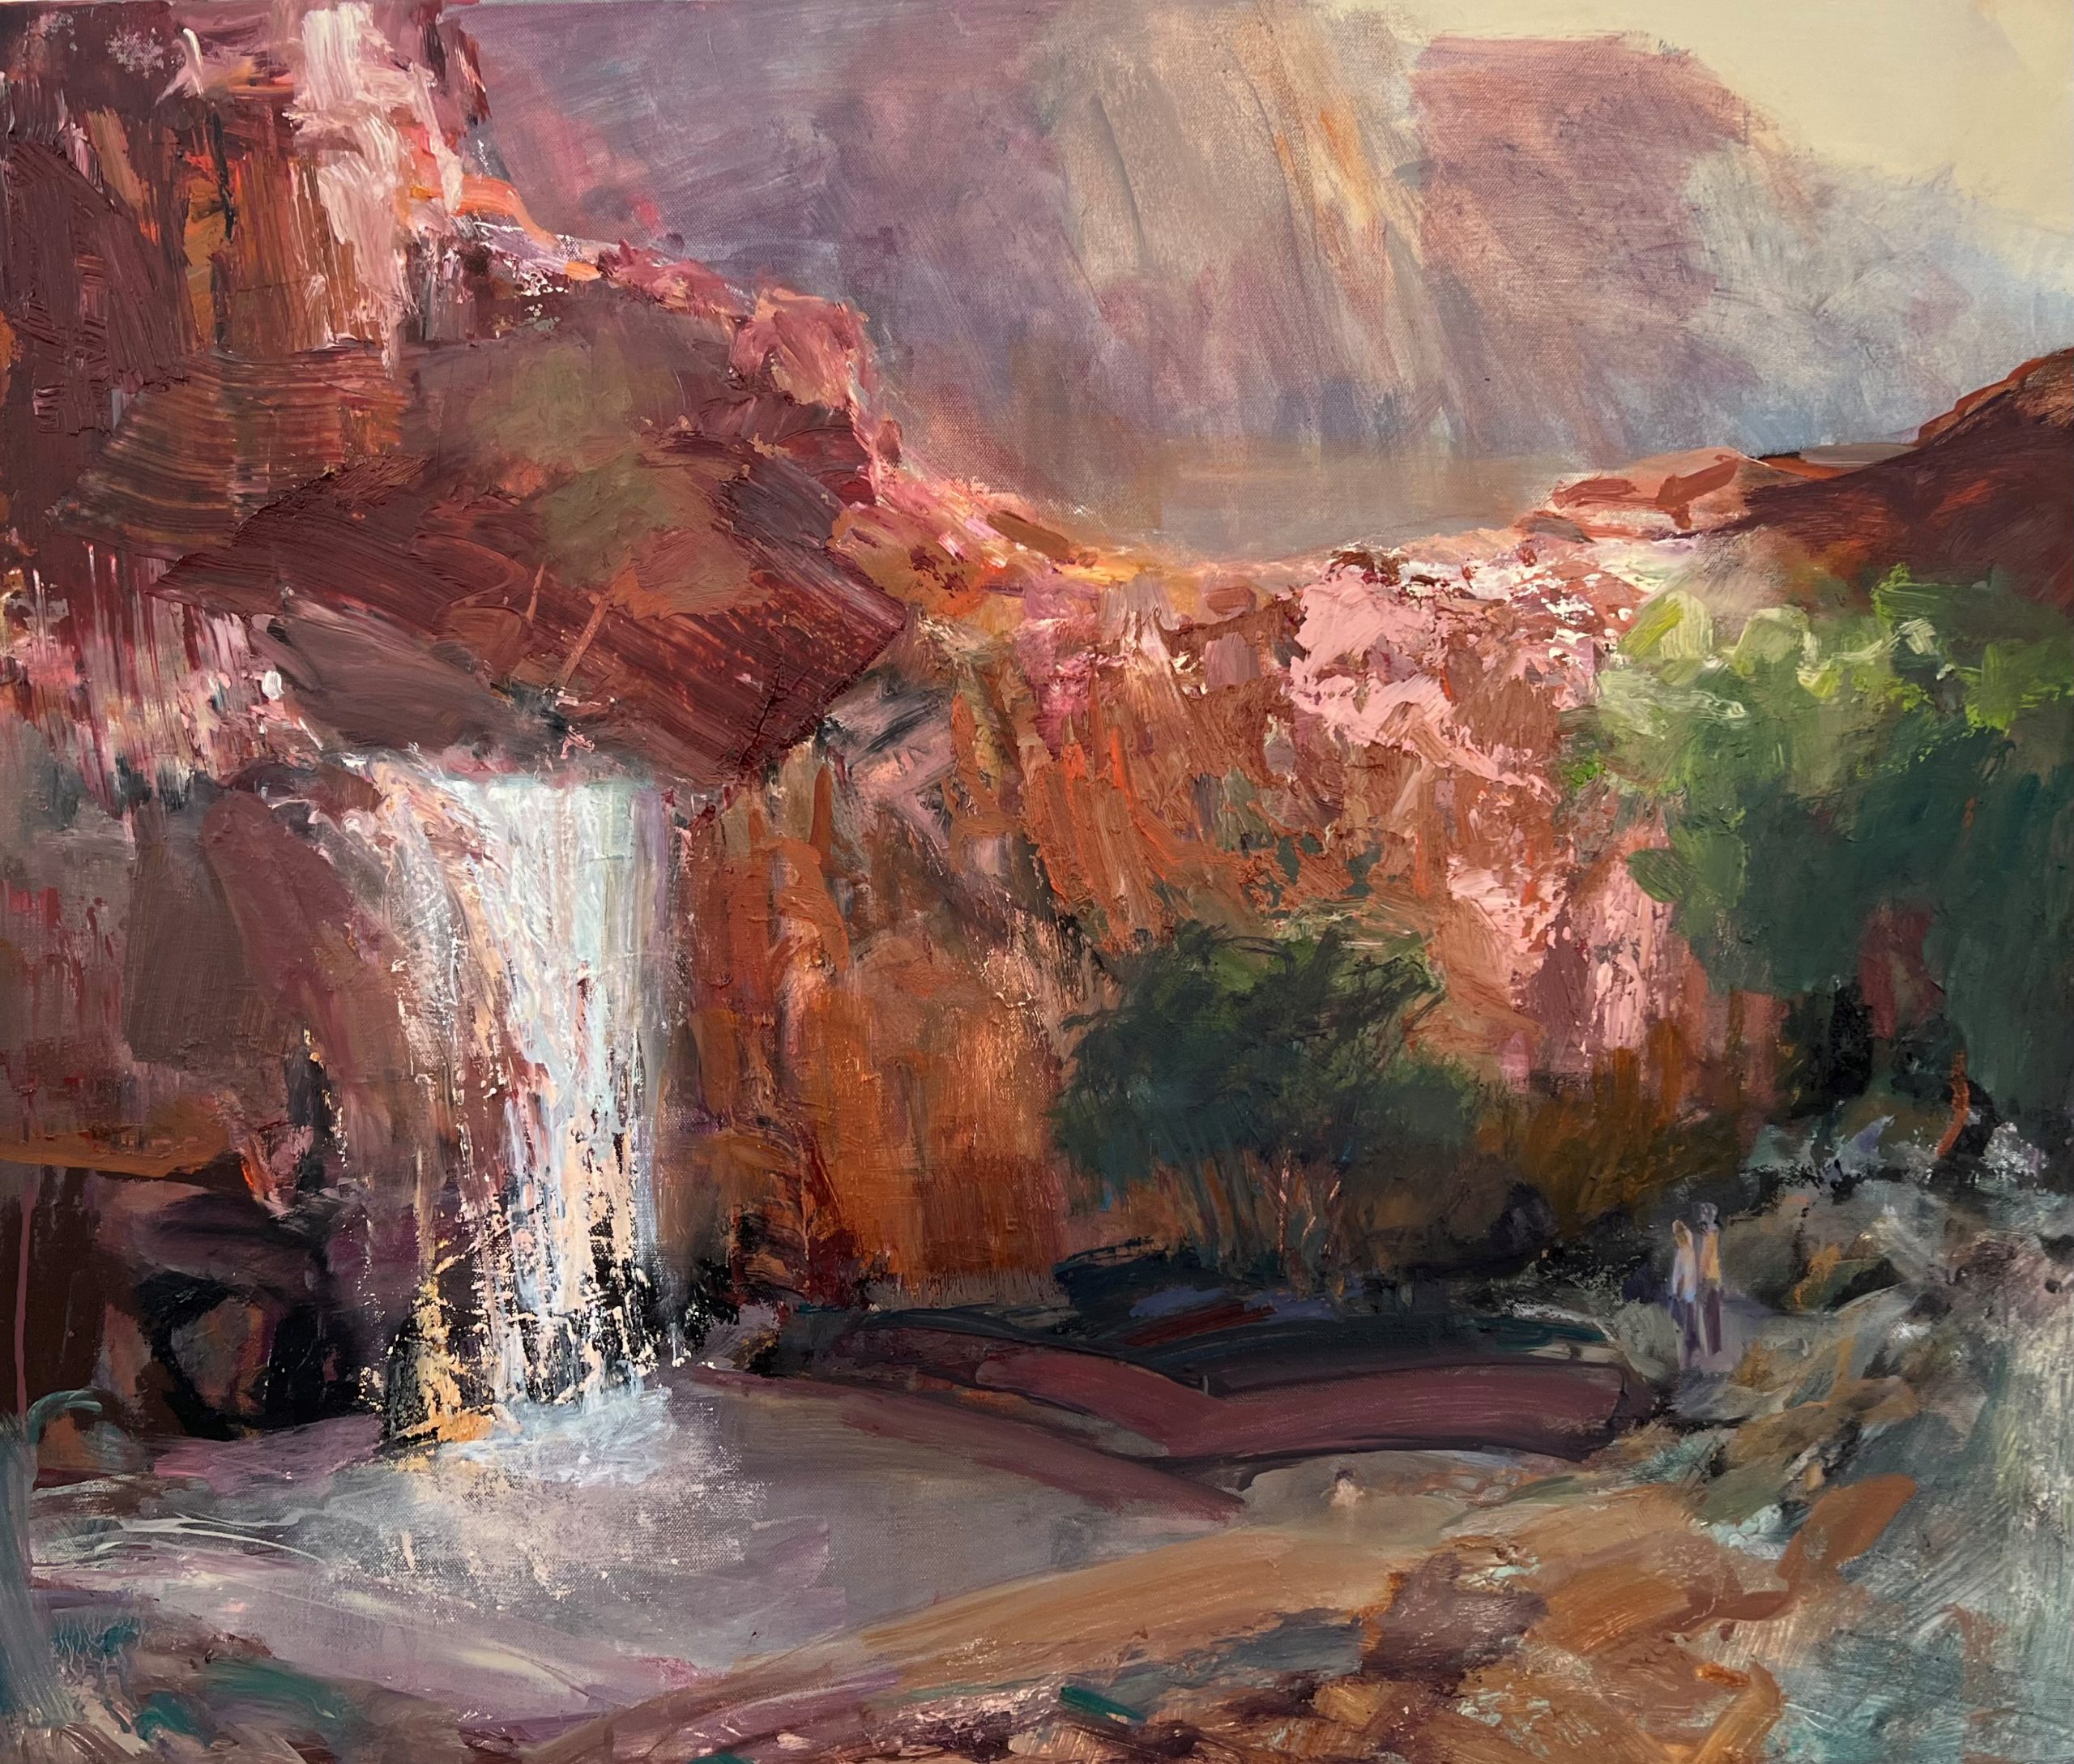 Kerry McInnis 'Waterfall' oil on canvas 51 x 61cm $4,500 SOLD